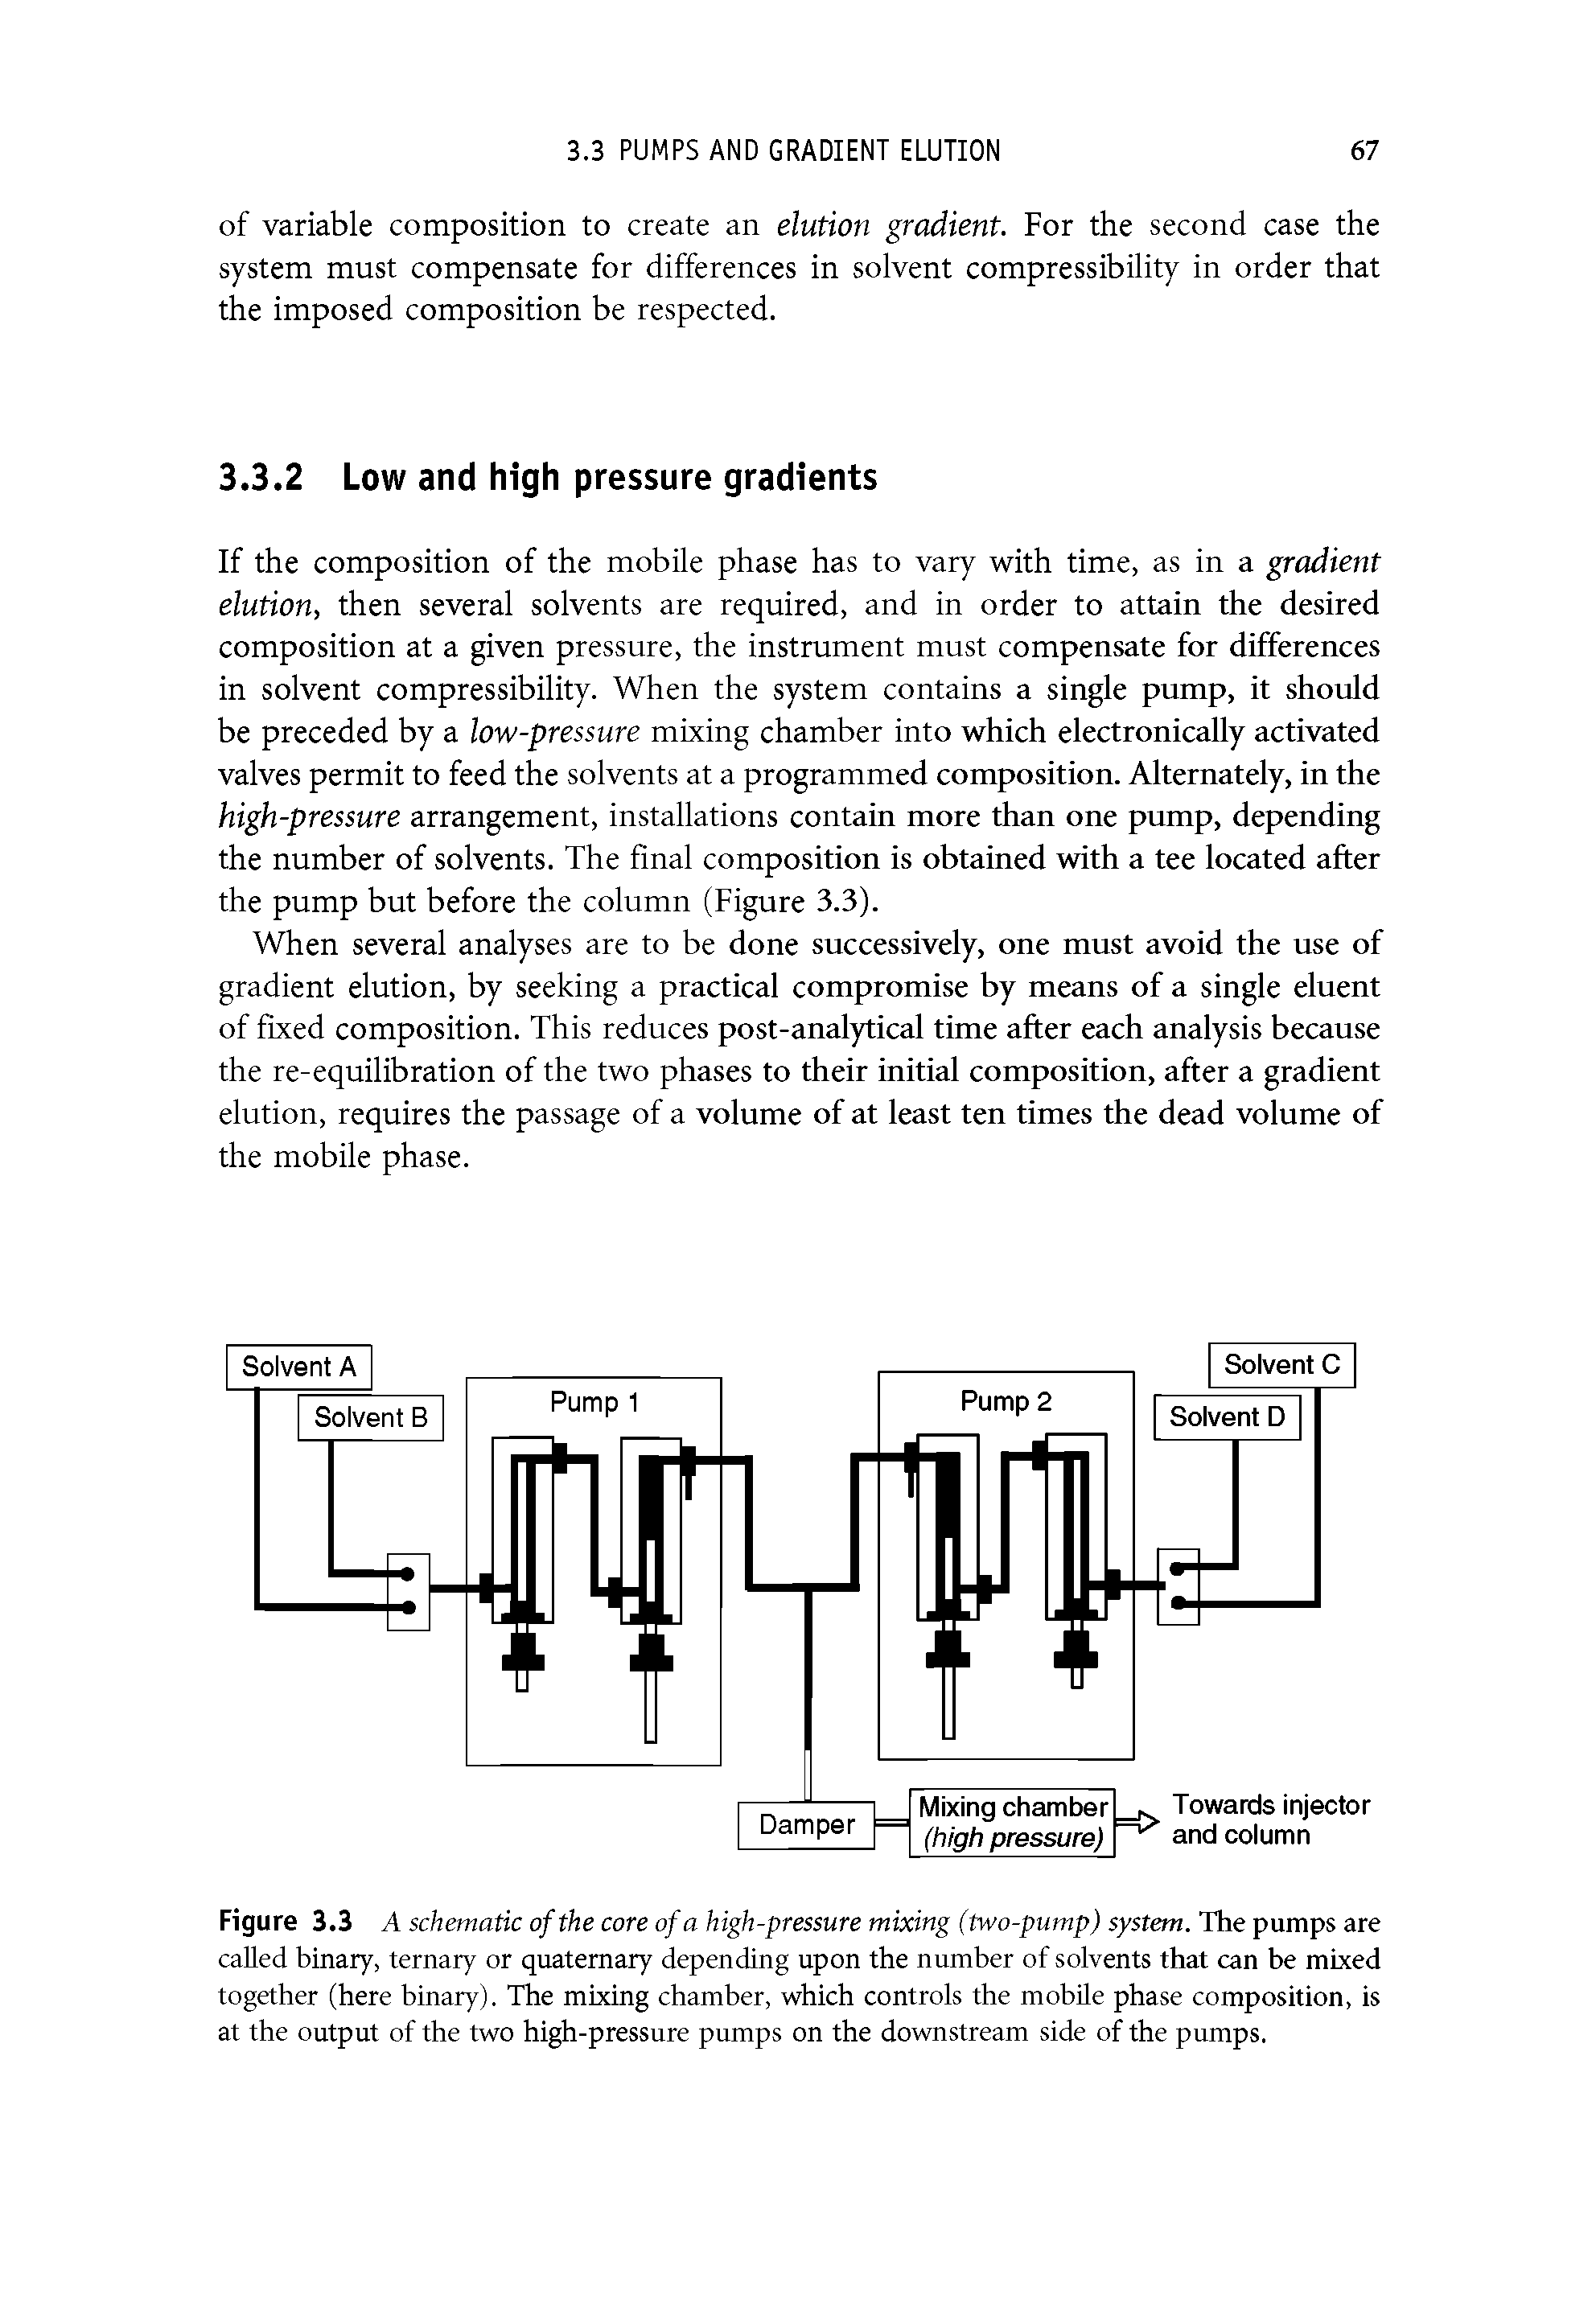 Figure 3.3 A schematic of the core of a high-pressure mixing (two-pump) system. The pumps are called binary, ternary or quaternary depending upon the number of solvents that can be mixed together (here binary). The mixing chamber, which controls the mobile phase composition, is at the output of the two high-pressure pumps on the downstream side of the pumps.